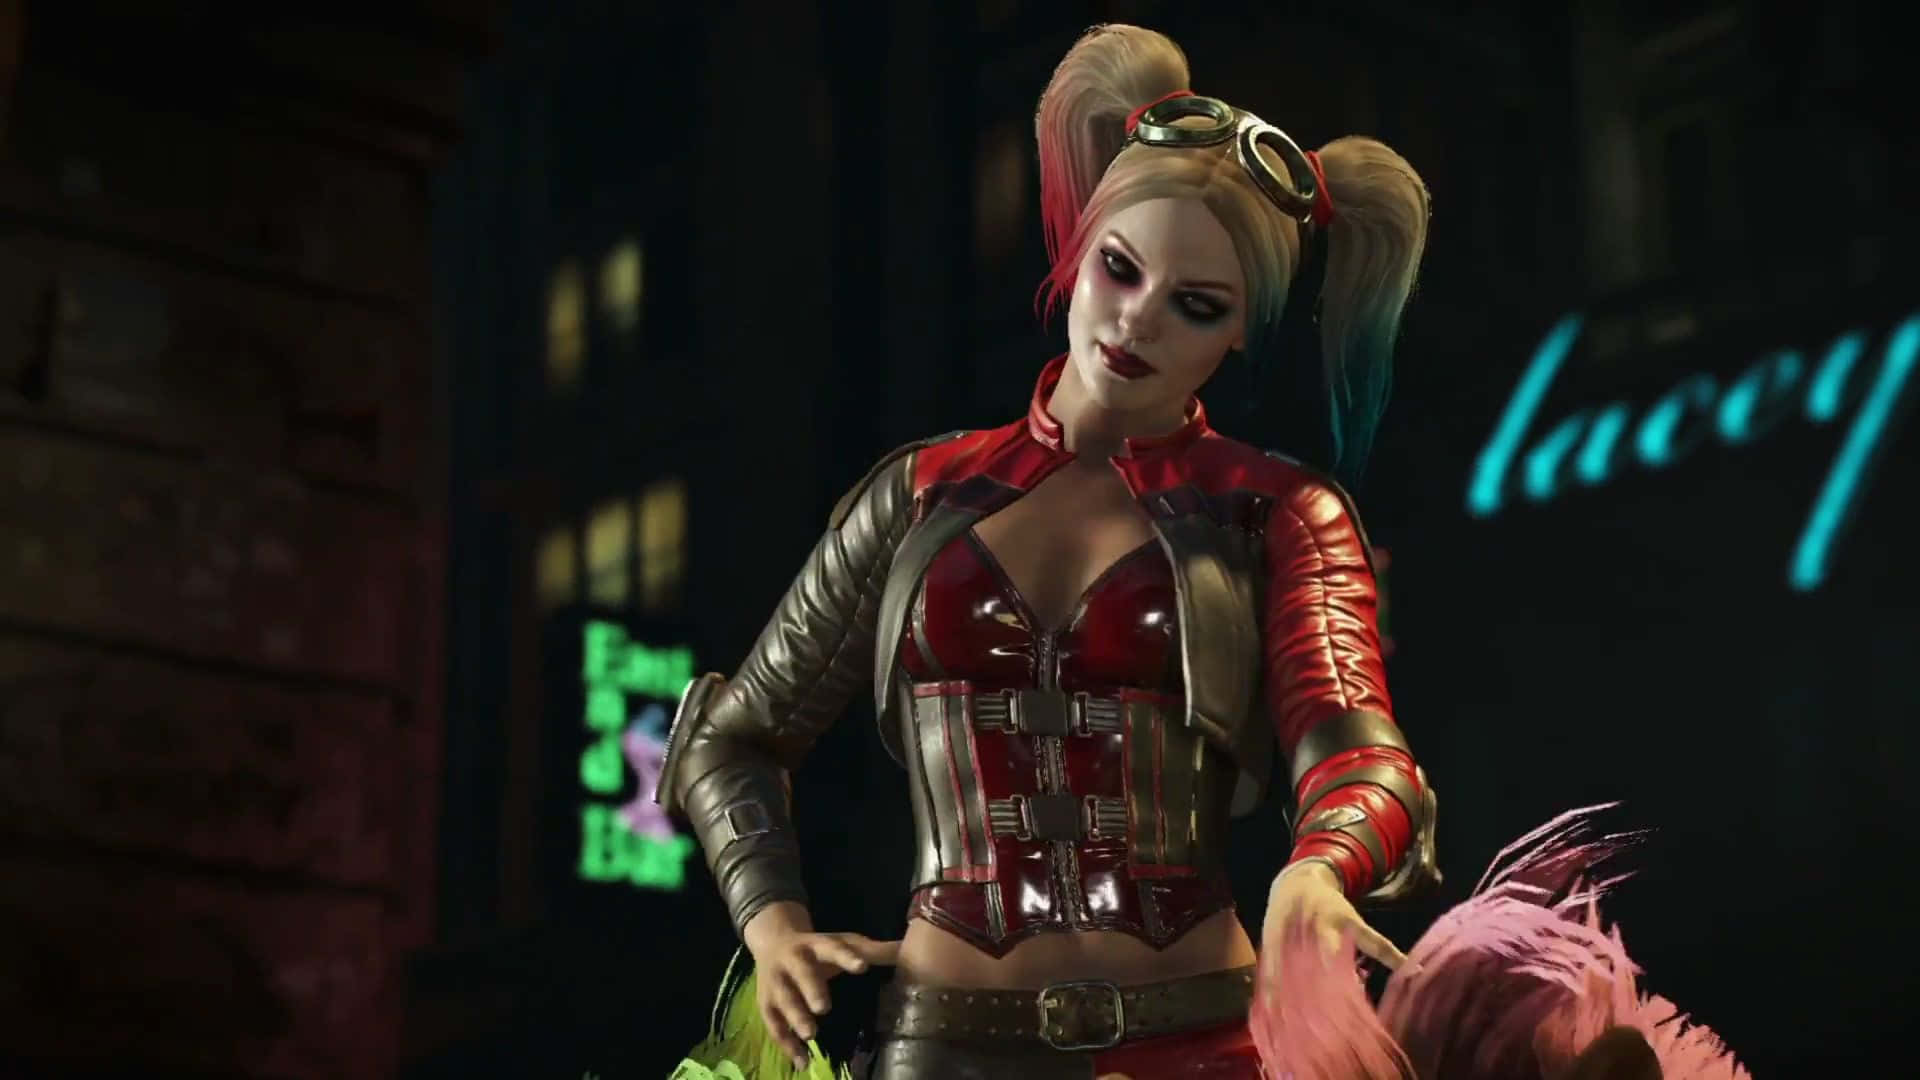 An Unstoppable Force - Harley Quinn in Injustice 2 Wallpaper